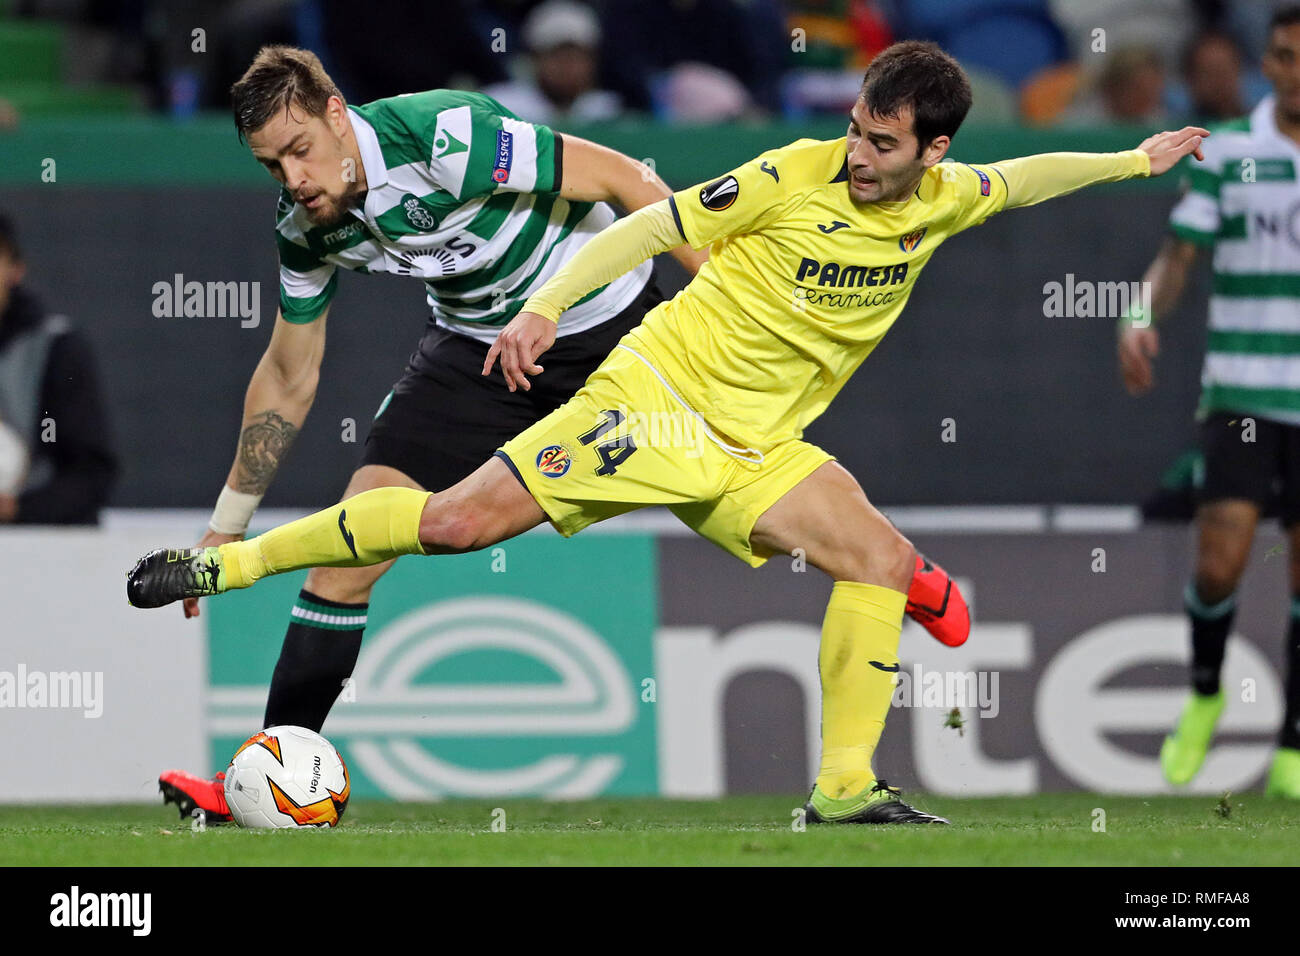 Sebastián Coates of Sporting CP (L) vies for the ball with Alfonso Pedraza of Villarreal FC (R) during the Europa League 2018/2019 footballl match between Sporting CP vs Villarreal FC. (Final score: Sporting CP 0 - 1 Villarreal FC) Stock Photo